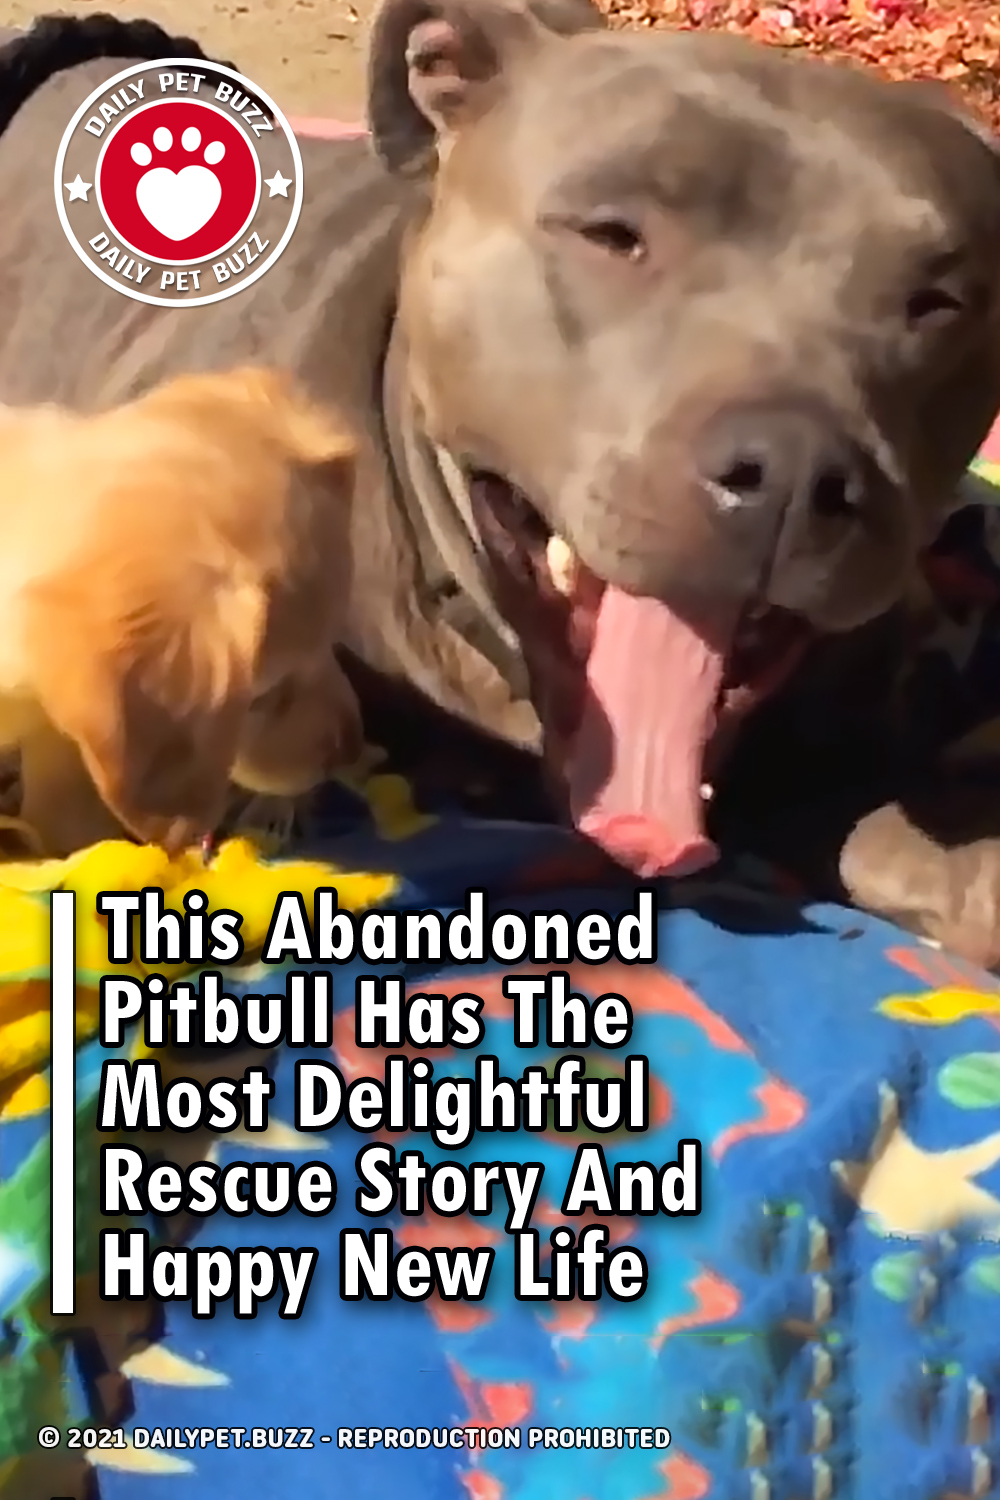 This Abandoned Pitbull Has The Most Delightful Rescue Story And Happy New Life